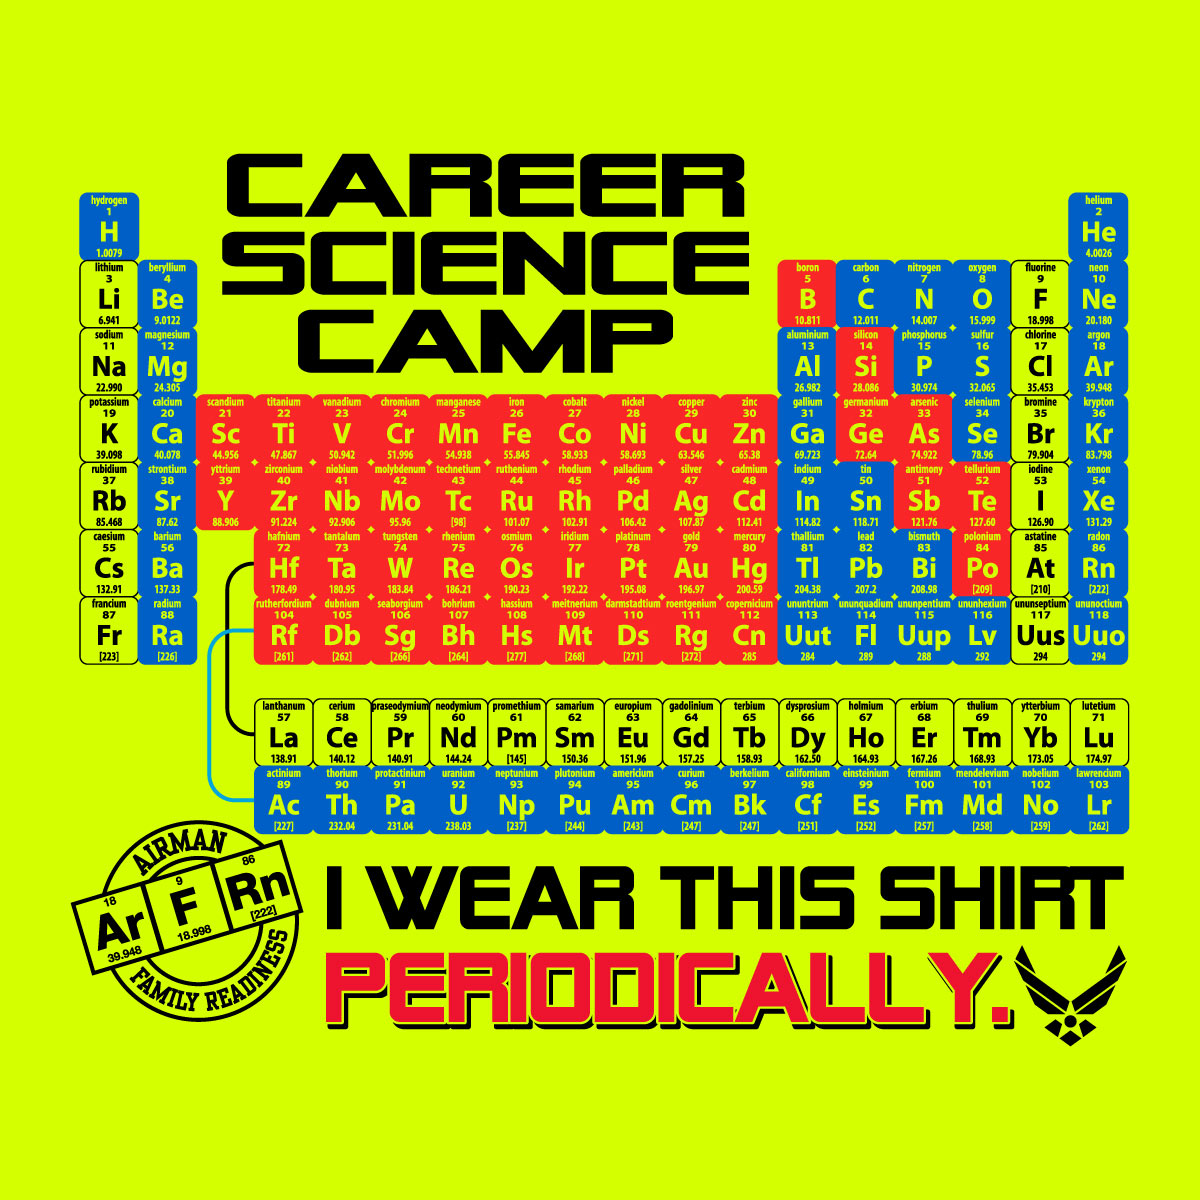 KenYoungCompany_CareerScienceCamp_PeriodicTable.jpg